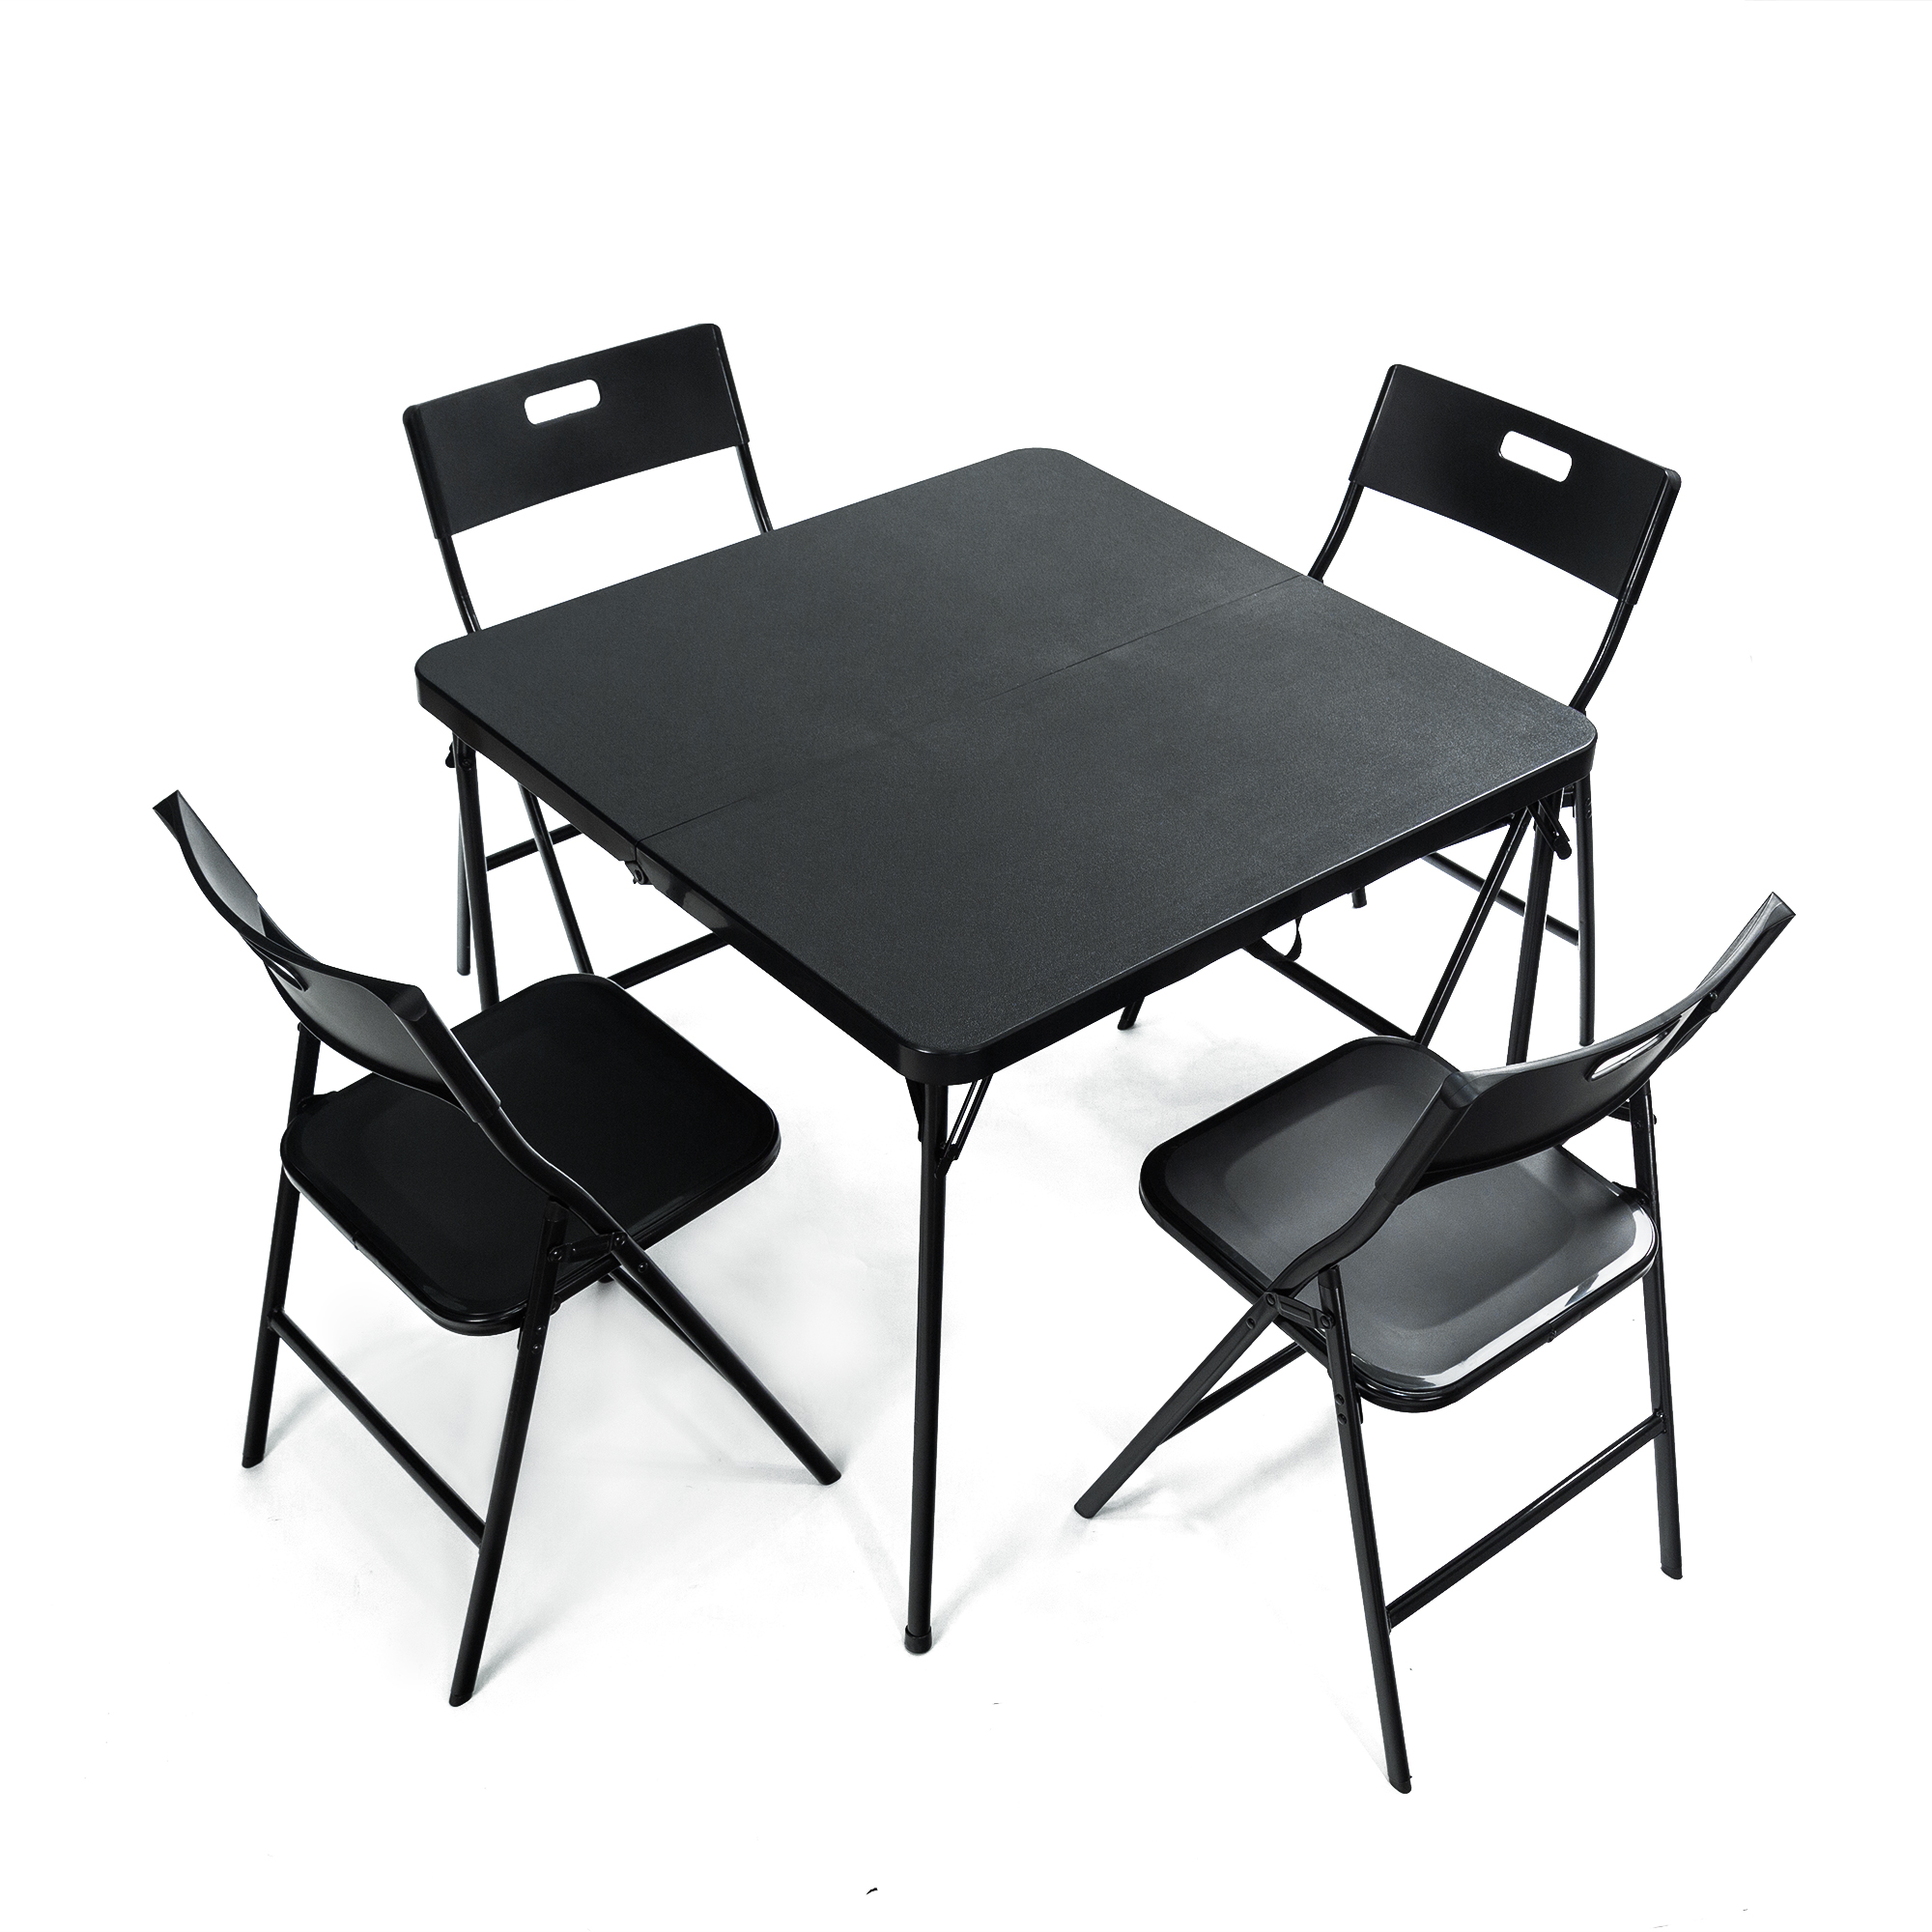 【VIDEO provided】5 Pieces Folding Table and Chair Set 1+4 Tabletop can be Folded in Half Space Saving 1 Square Table and 4 Chairs Metal Legs Patio Furniture Set for Outdoor Garden Porch Balcony Lawn-Boyel Living